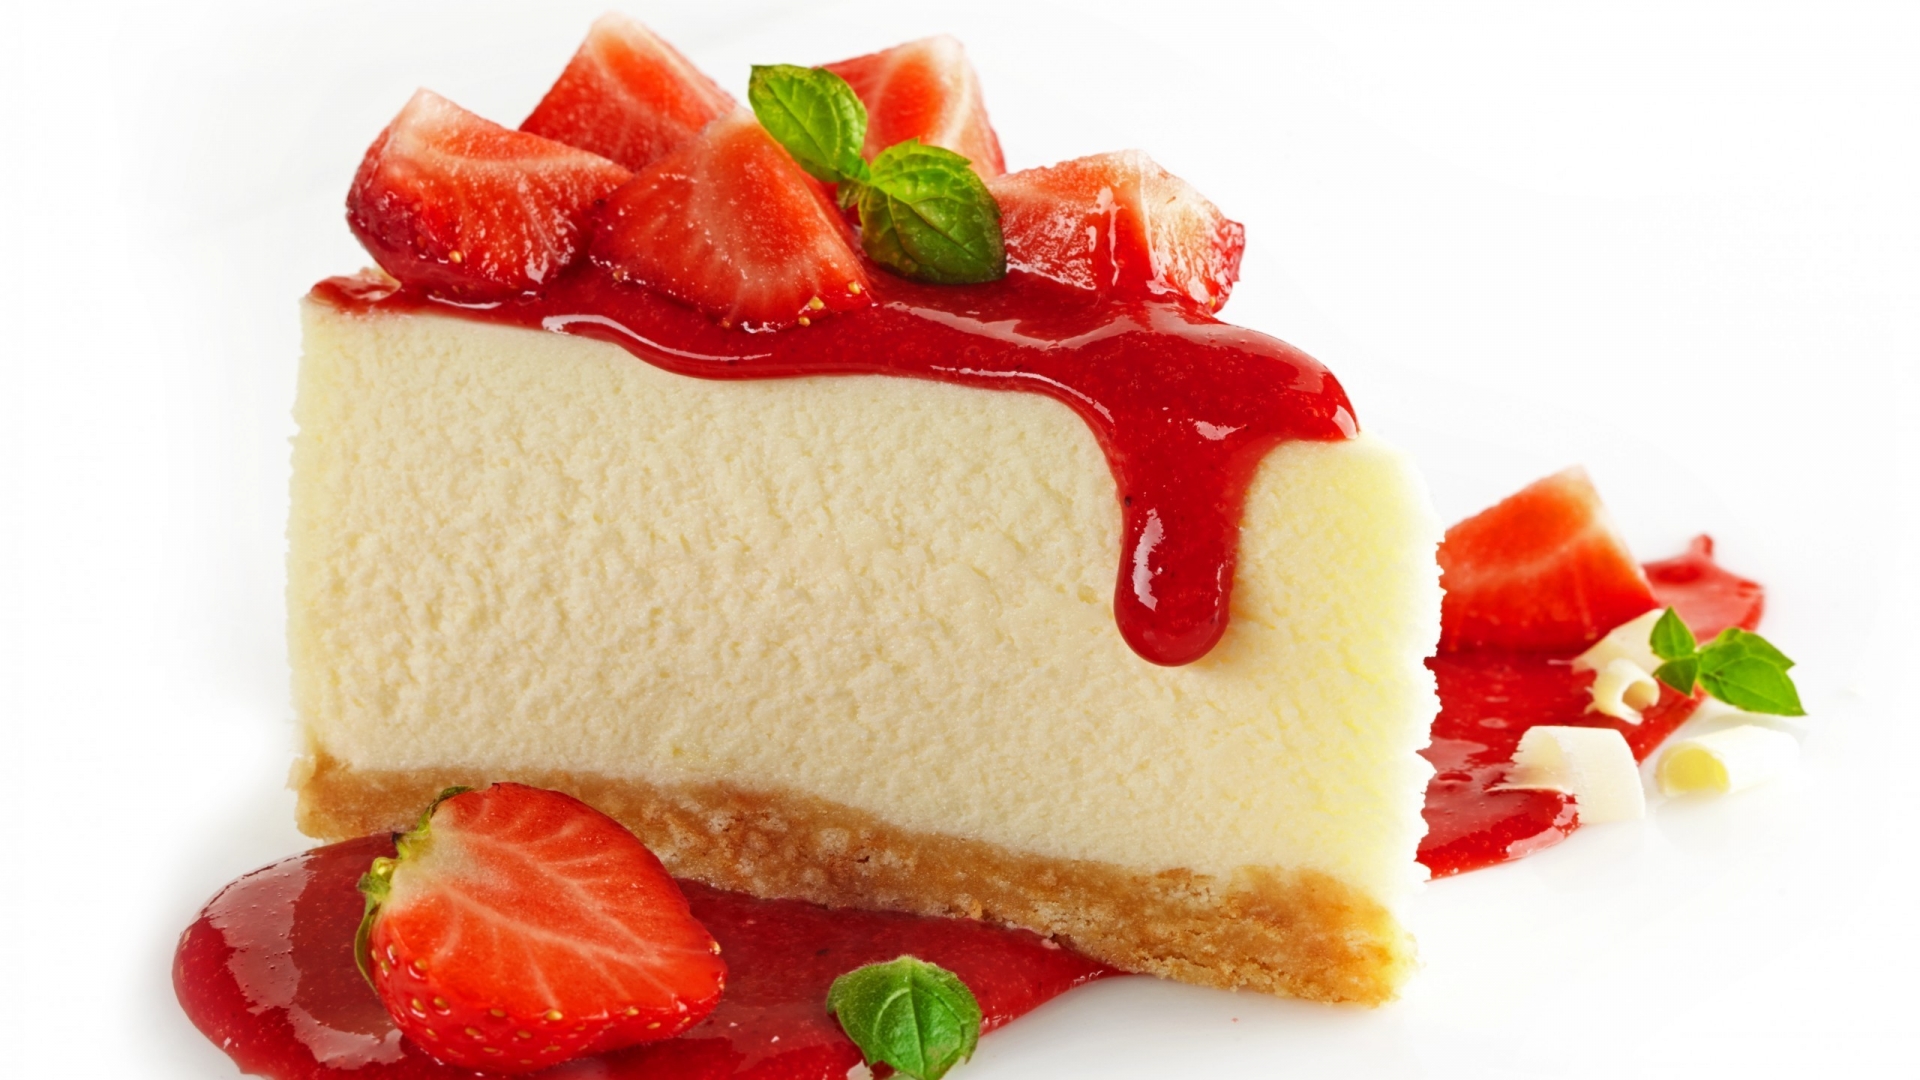 Strawberry Cheesecake  for 1920 x 1080 HDTV 1080p resolution